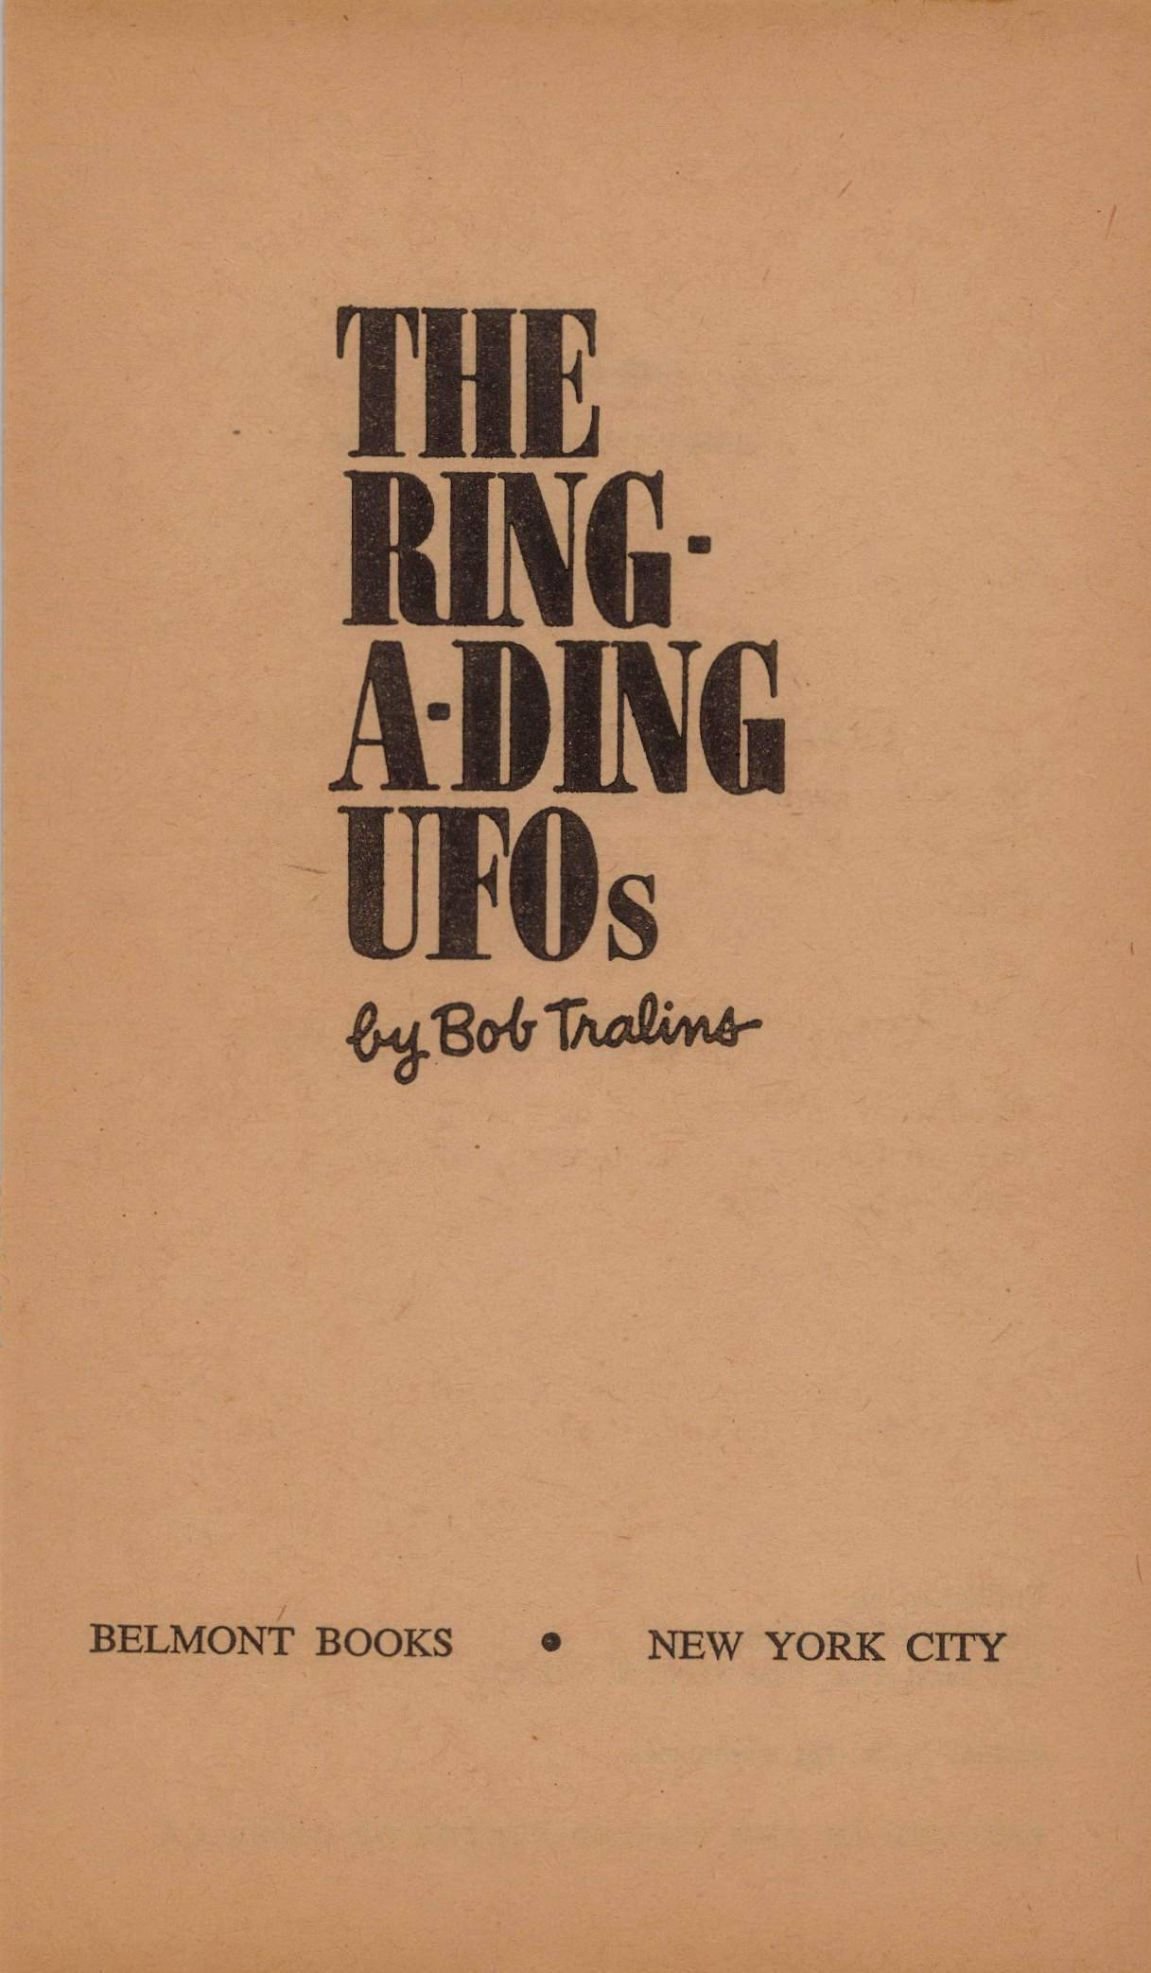 The Miss from SIS Ring-A-Ding UFOs by Bob Tralins page 004.jpg